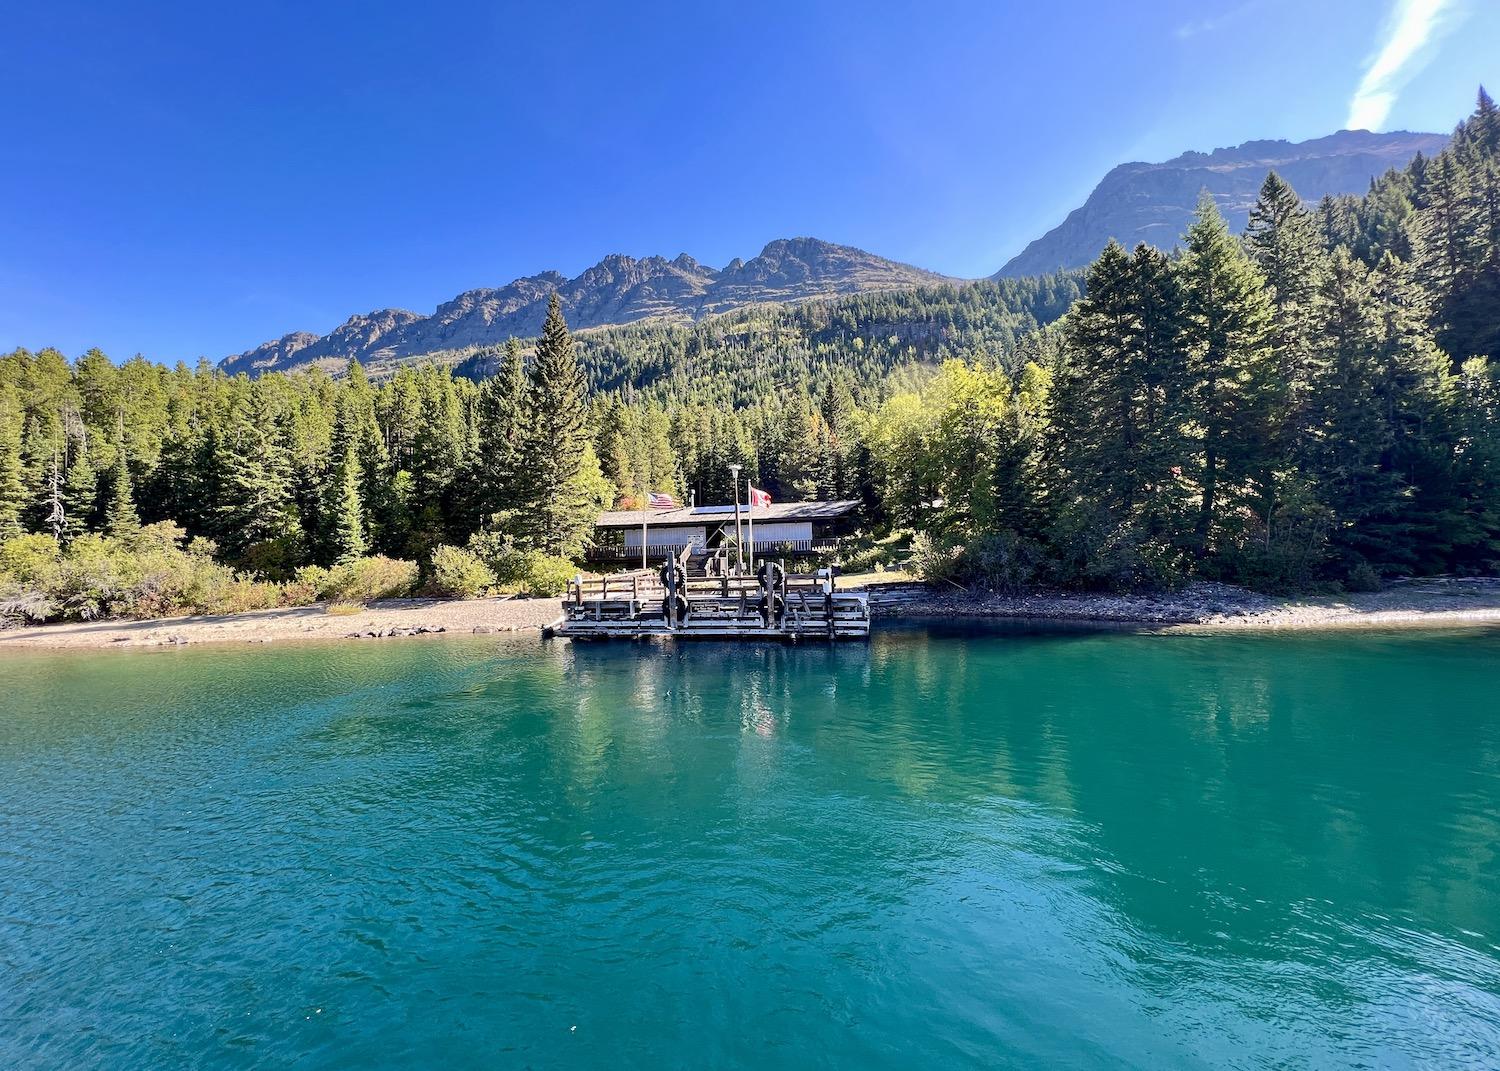 The M.V. International lands at this dock in Glacier National Park by the Goat Haunt Peace Pavilion.